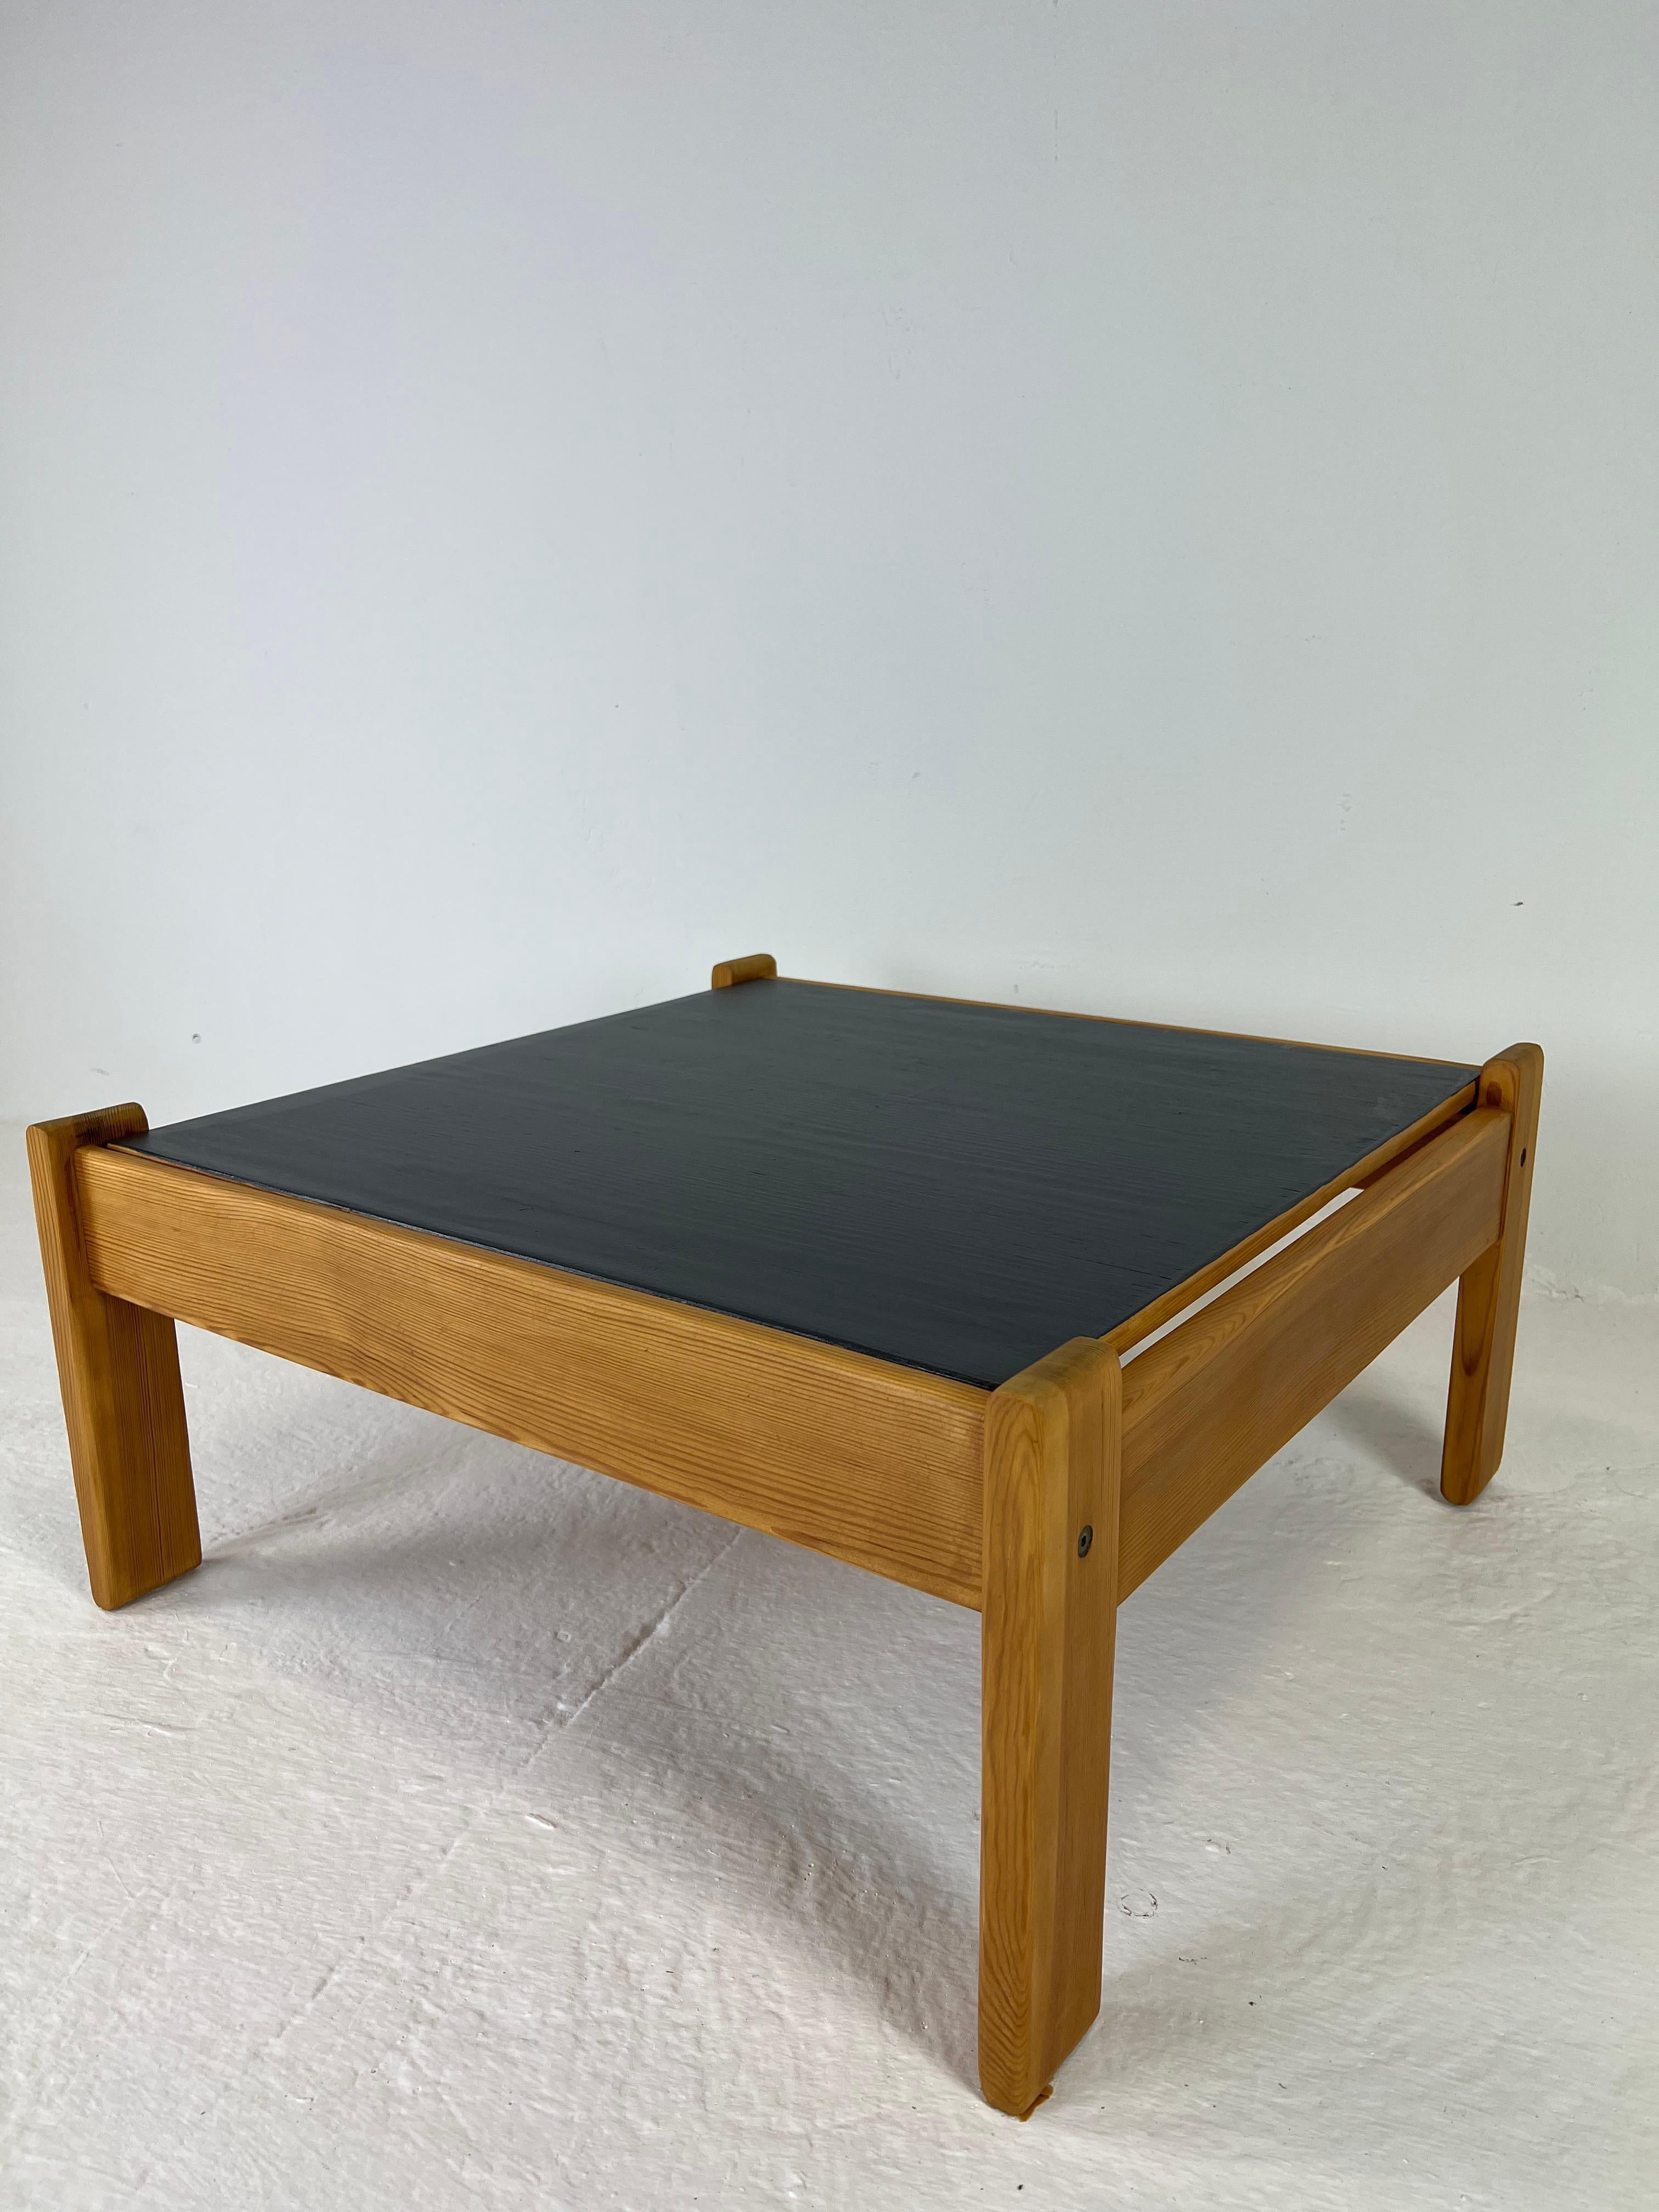 Two-Sided Modernist Coffee Table in Pine Wood, 1970s For Sale 8